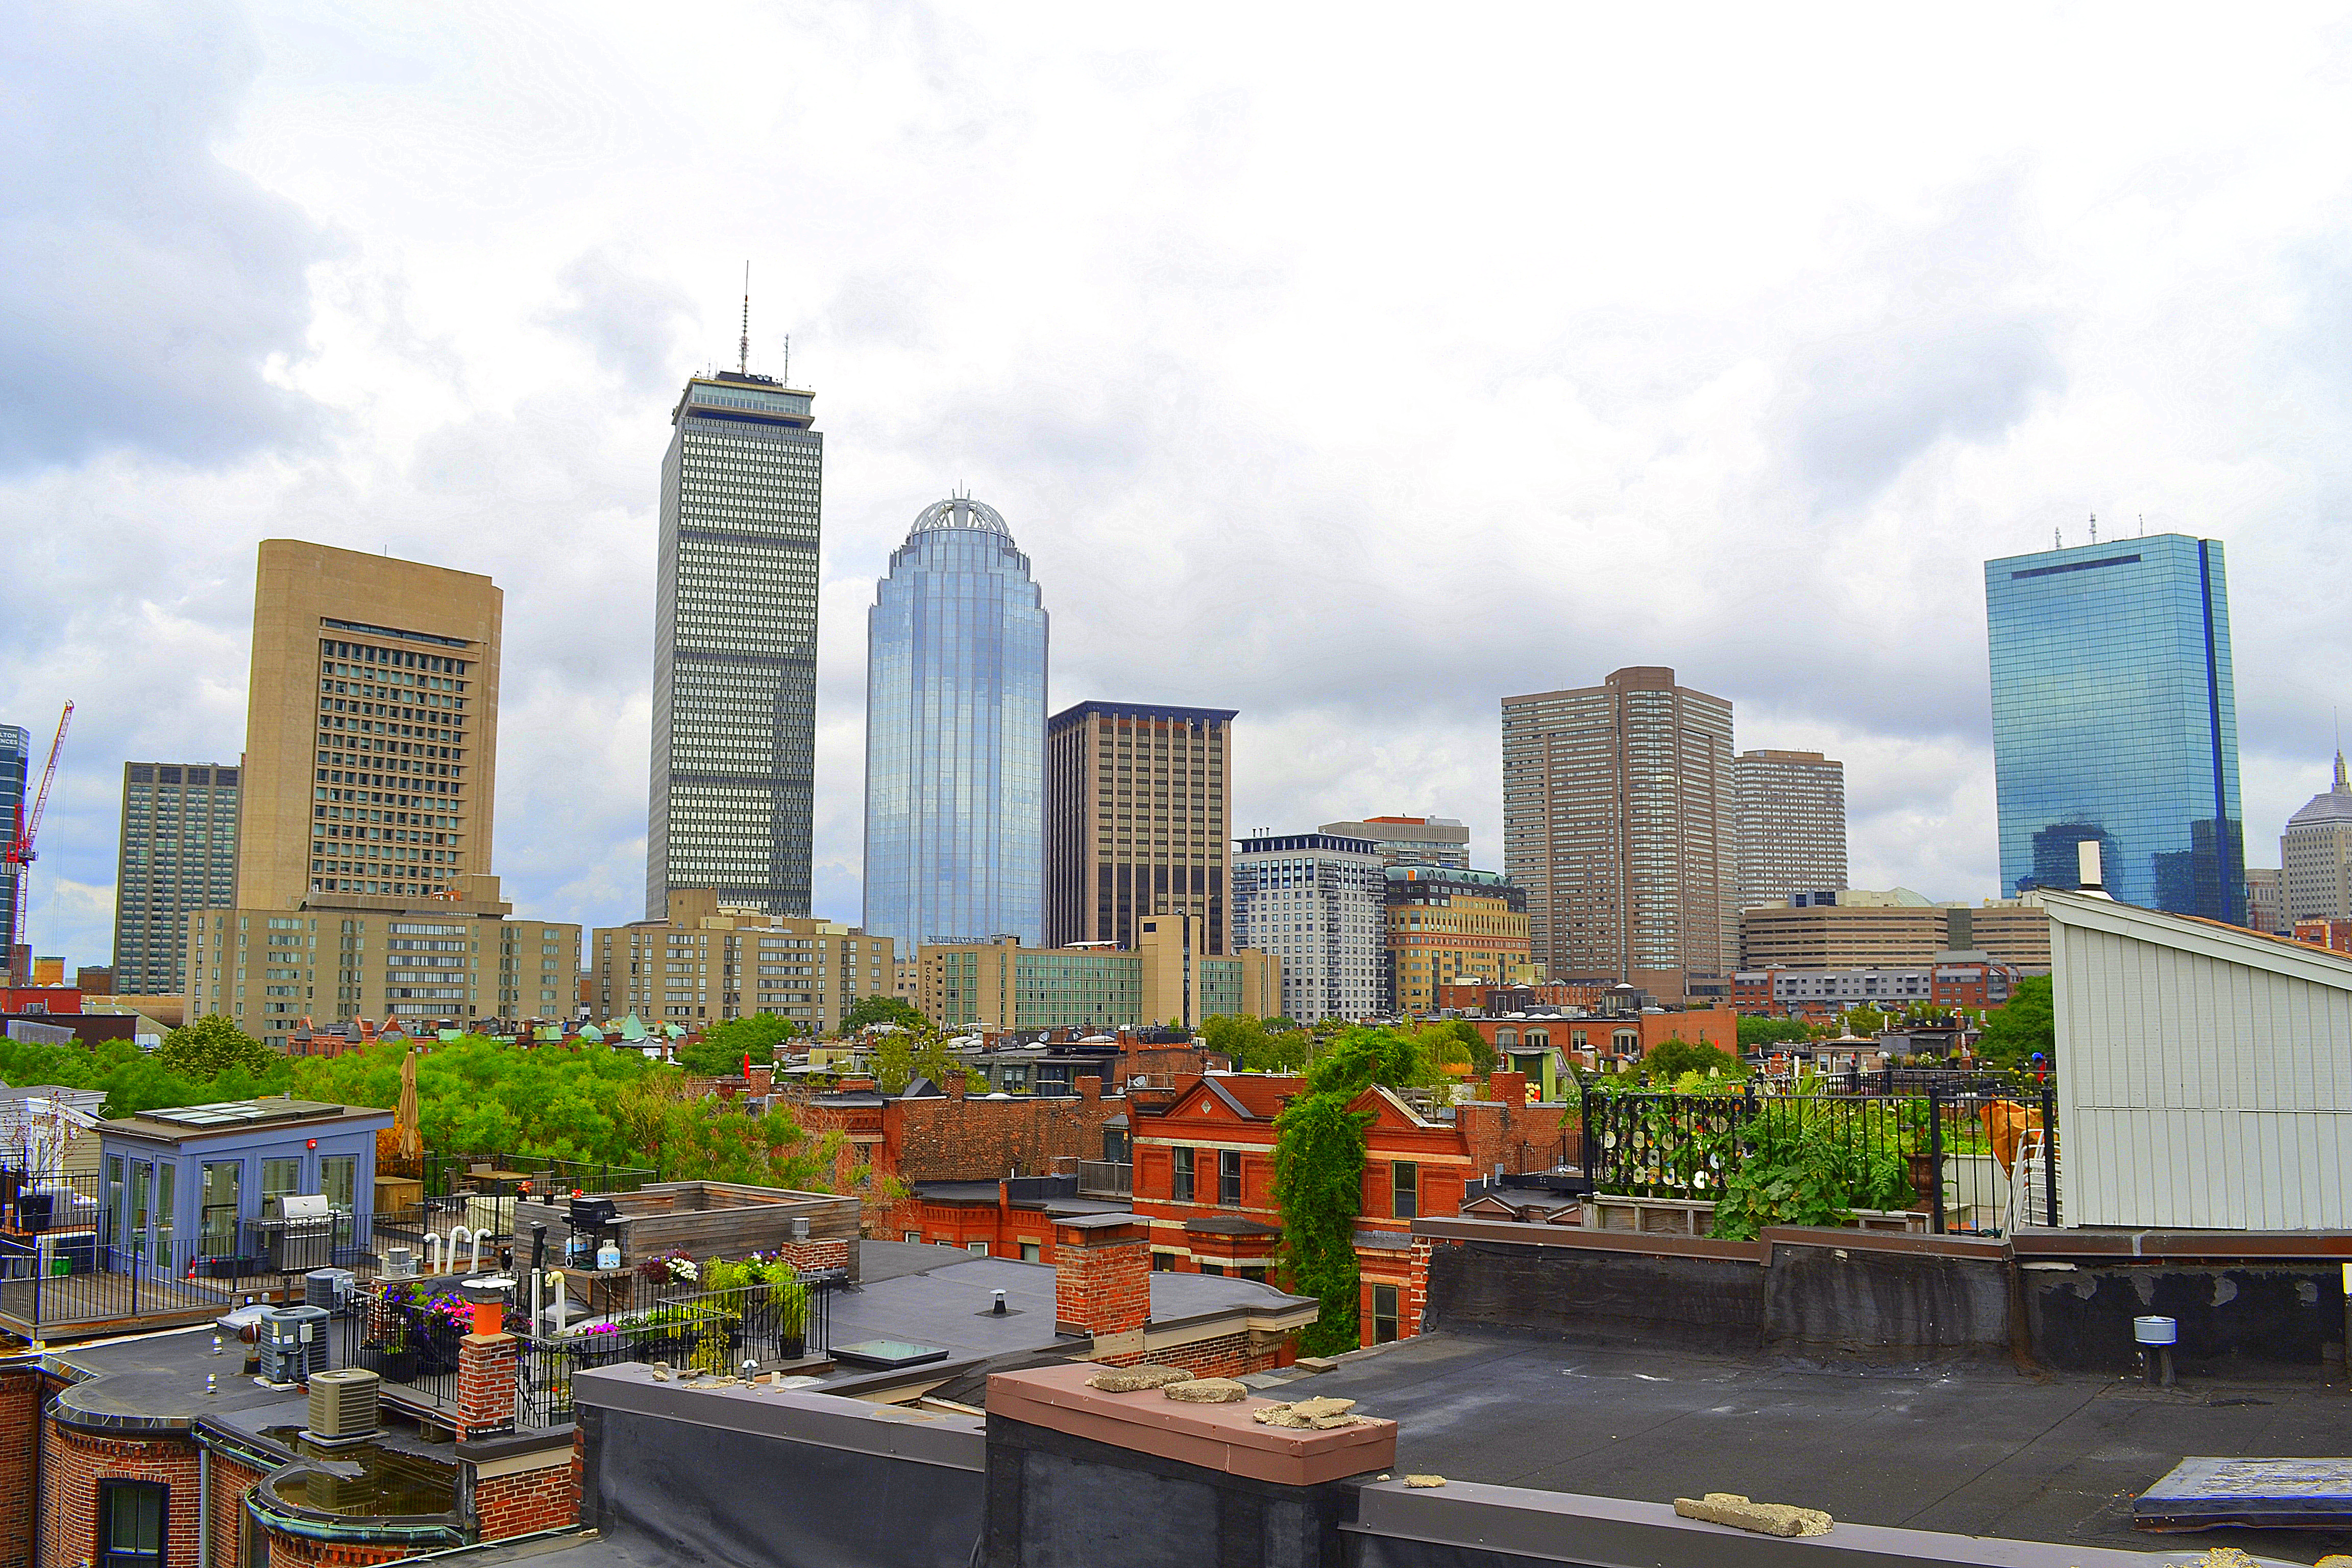 OFF MARKET: Create Your Dream Condo! South End One Bed with Private Roof Deck Access!